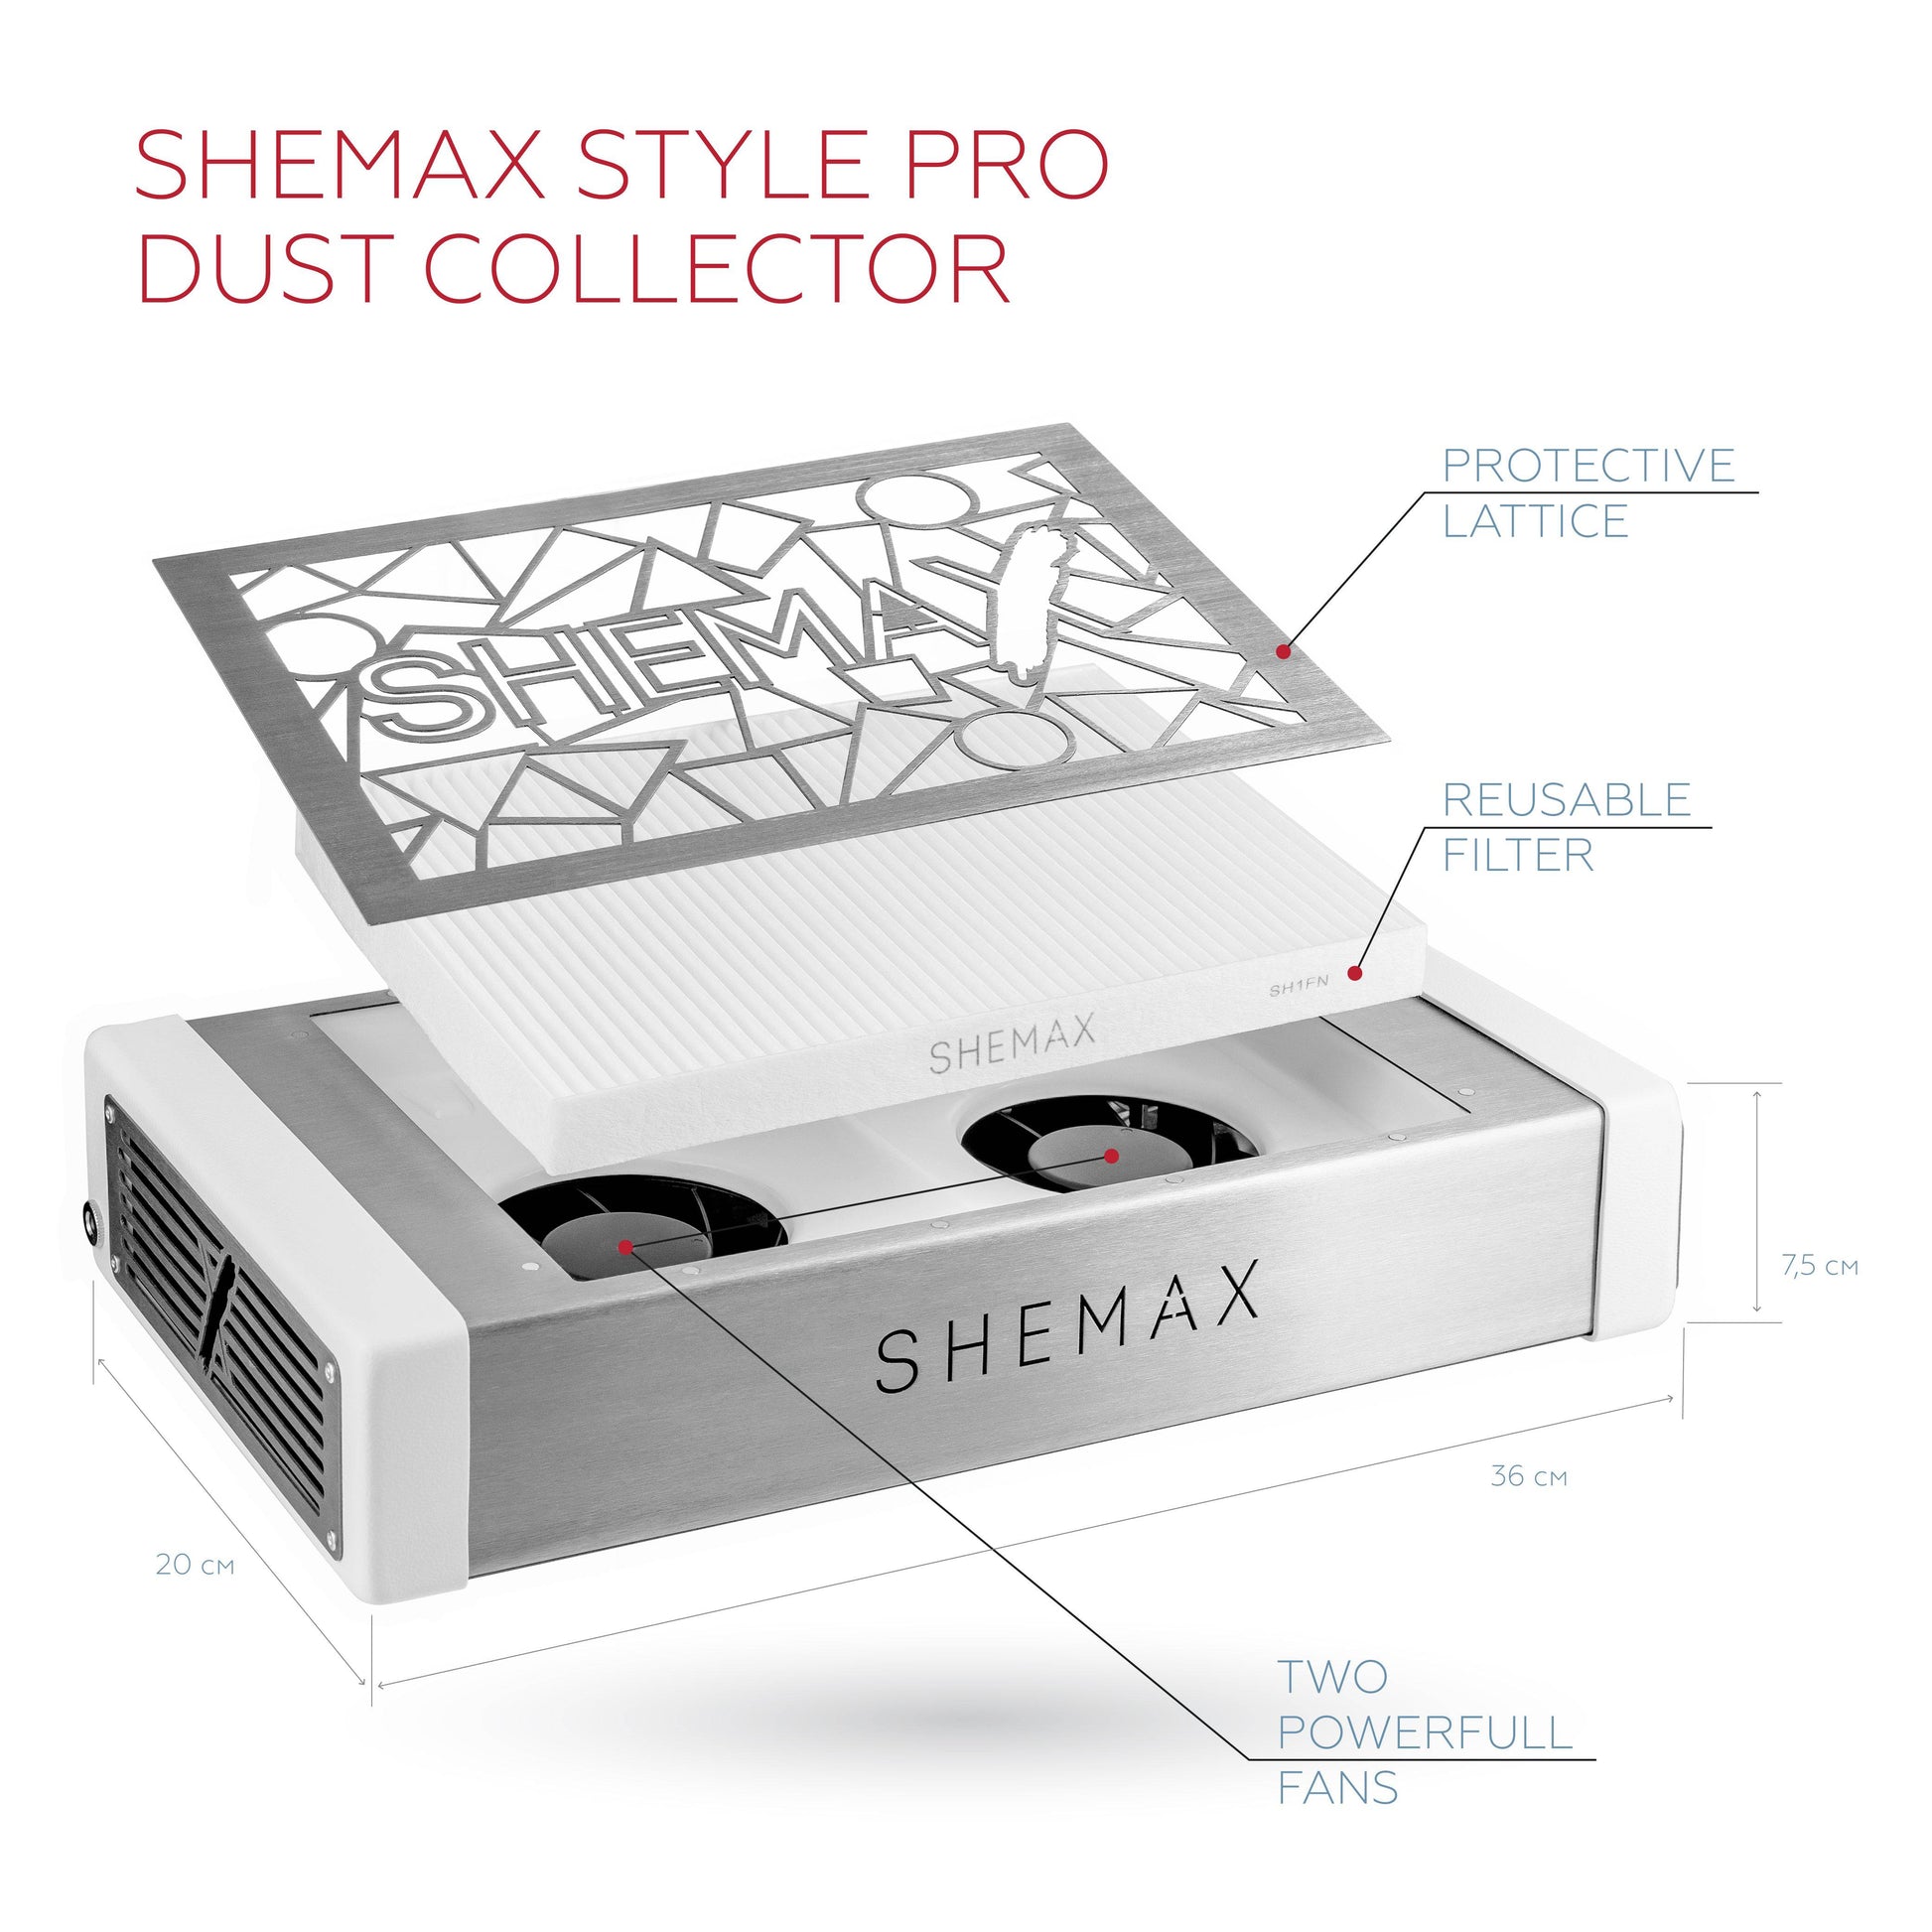 SHEMAX Style PRO White — Professional manicure dust collector - F.O.X Nails USA